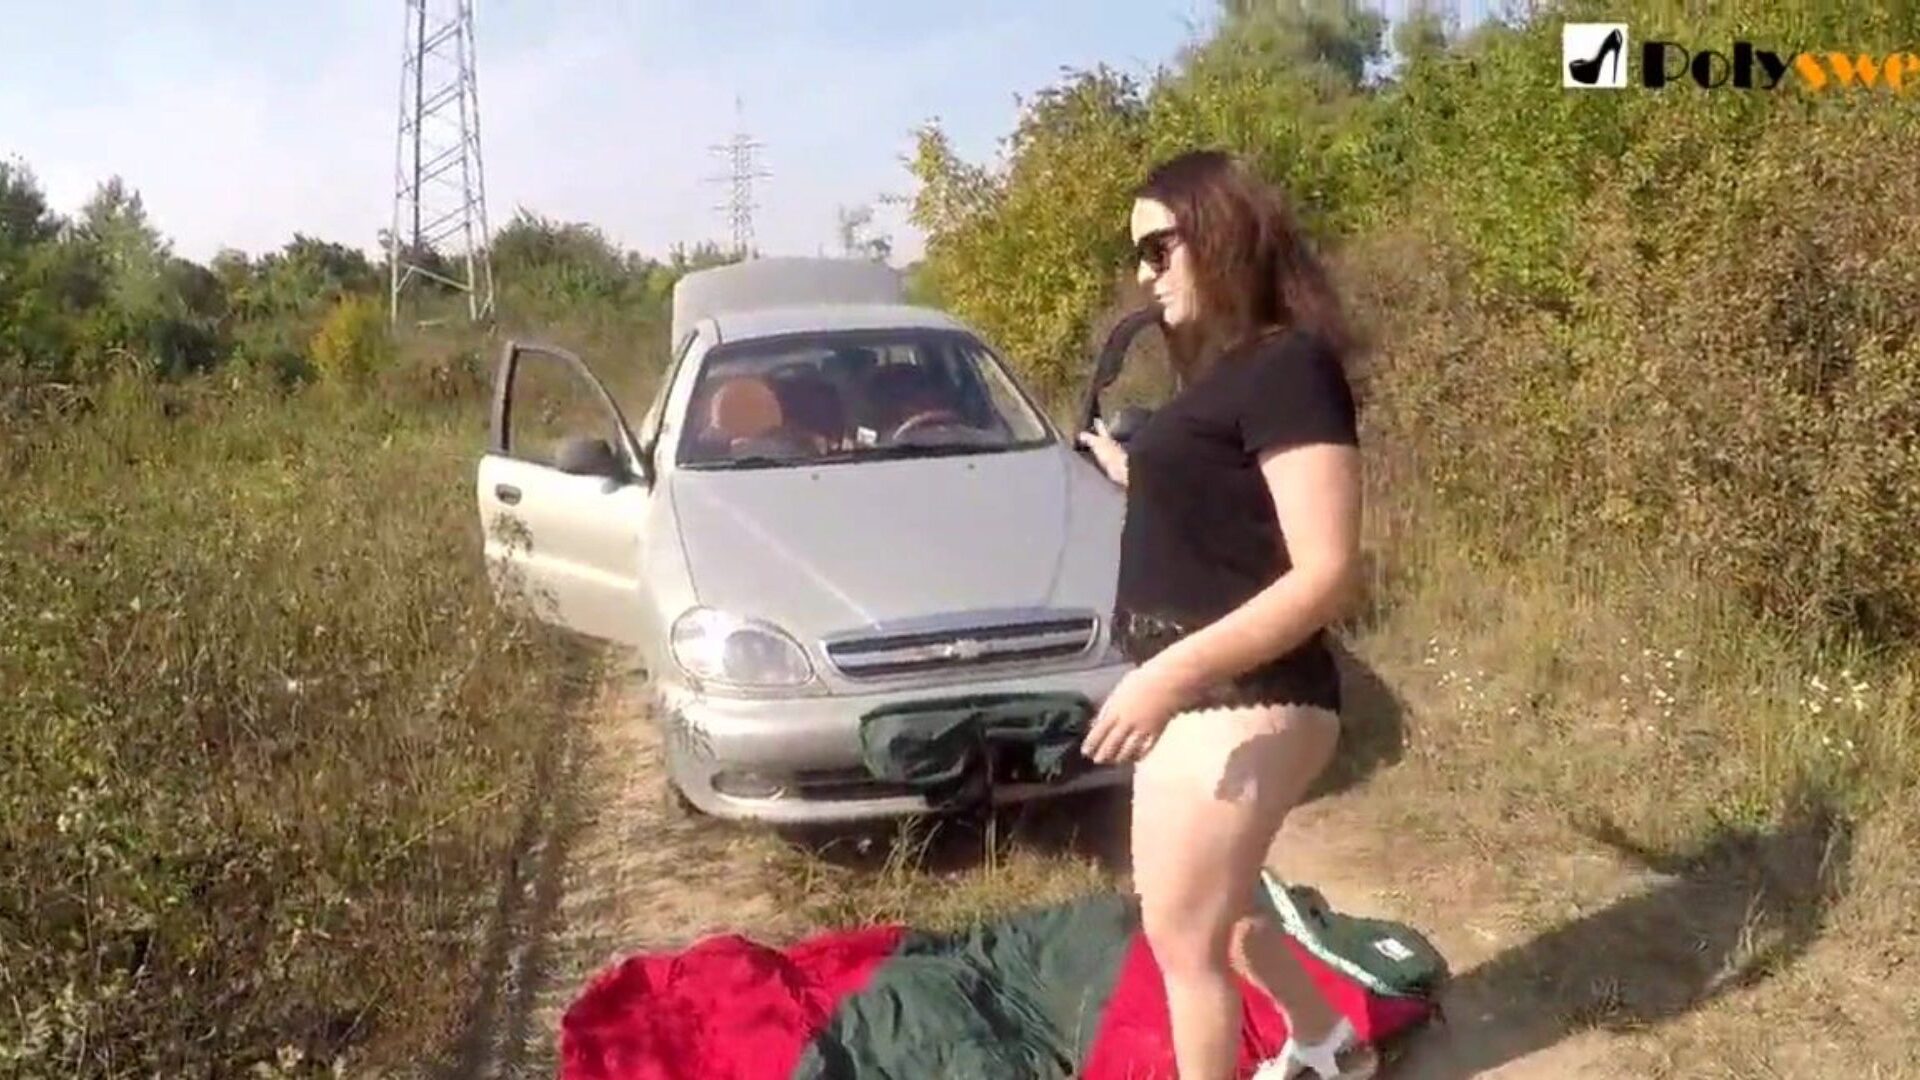 PUBLIC MASTURBATION GIRL I WAS CAUGHT BY A CAR IN THE BEGINNING OF THE VIDEO)